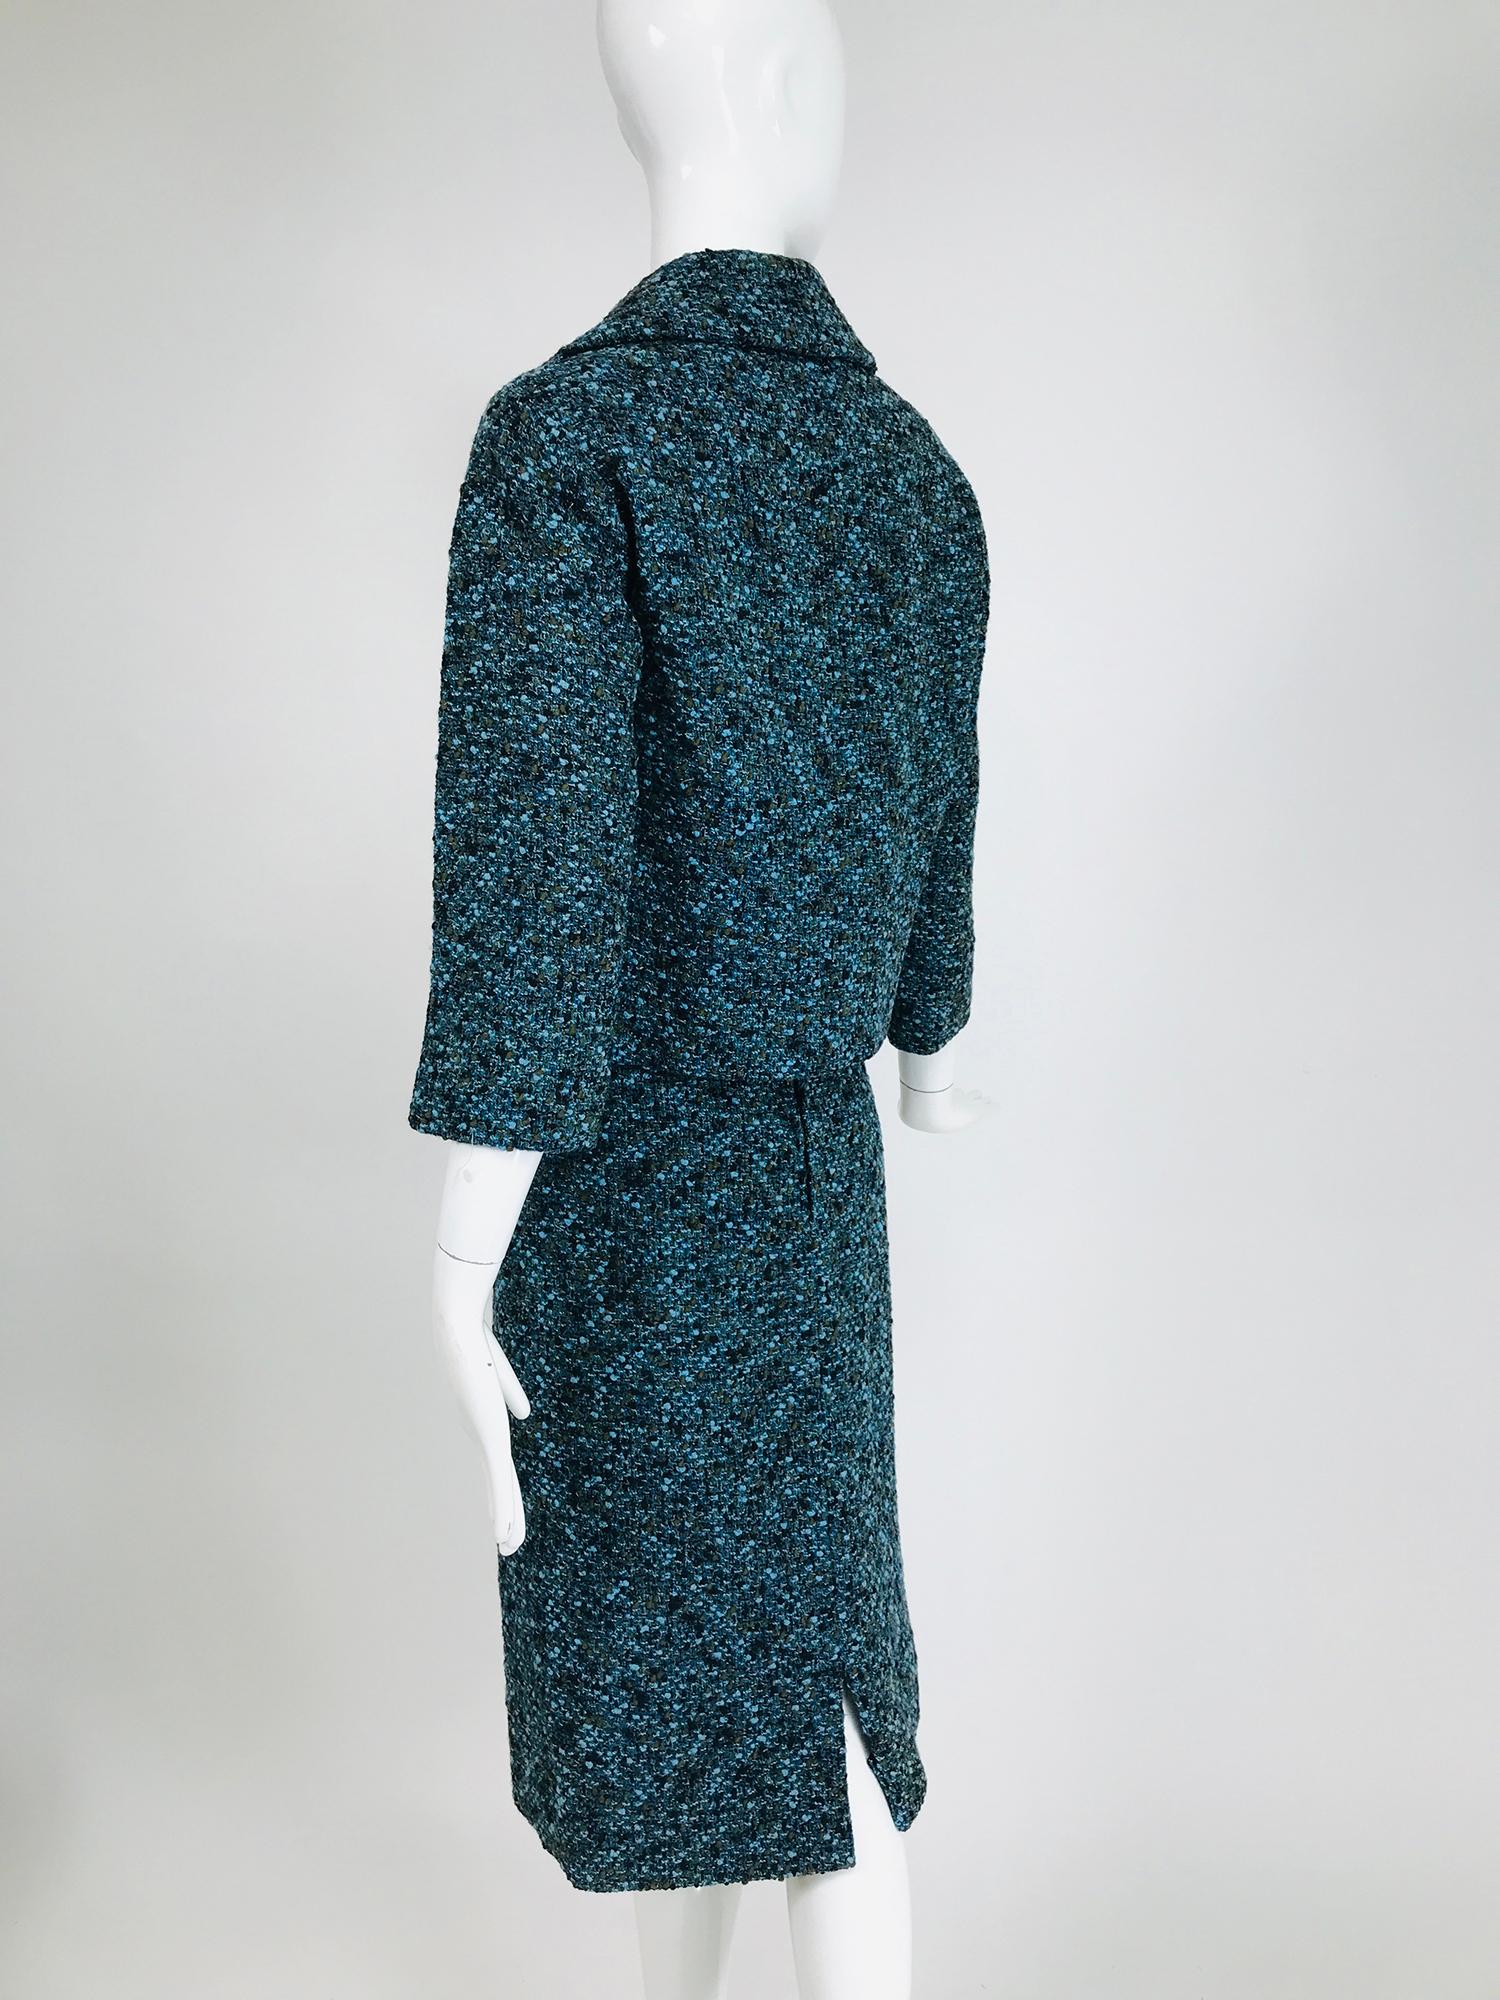 Jeanne Lanvin Numbered Couture Early 1960s Blue Tweed Skirt Suit  In Good Condition For Sale In West Palm Beach, FL